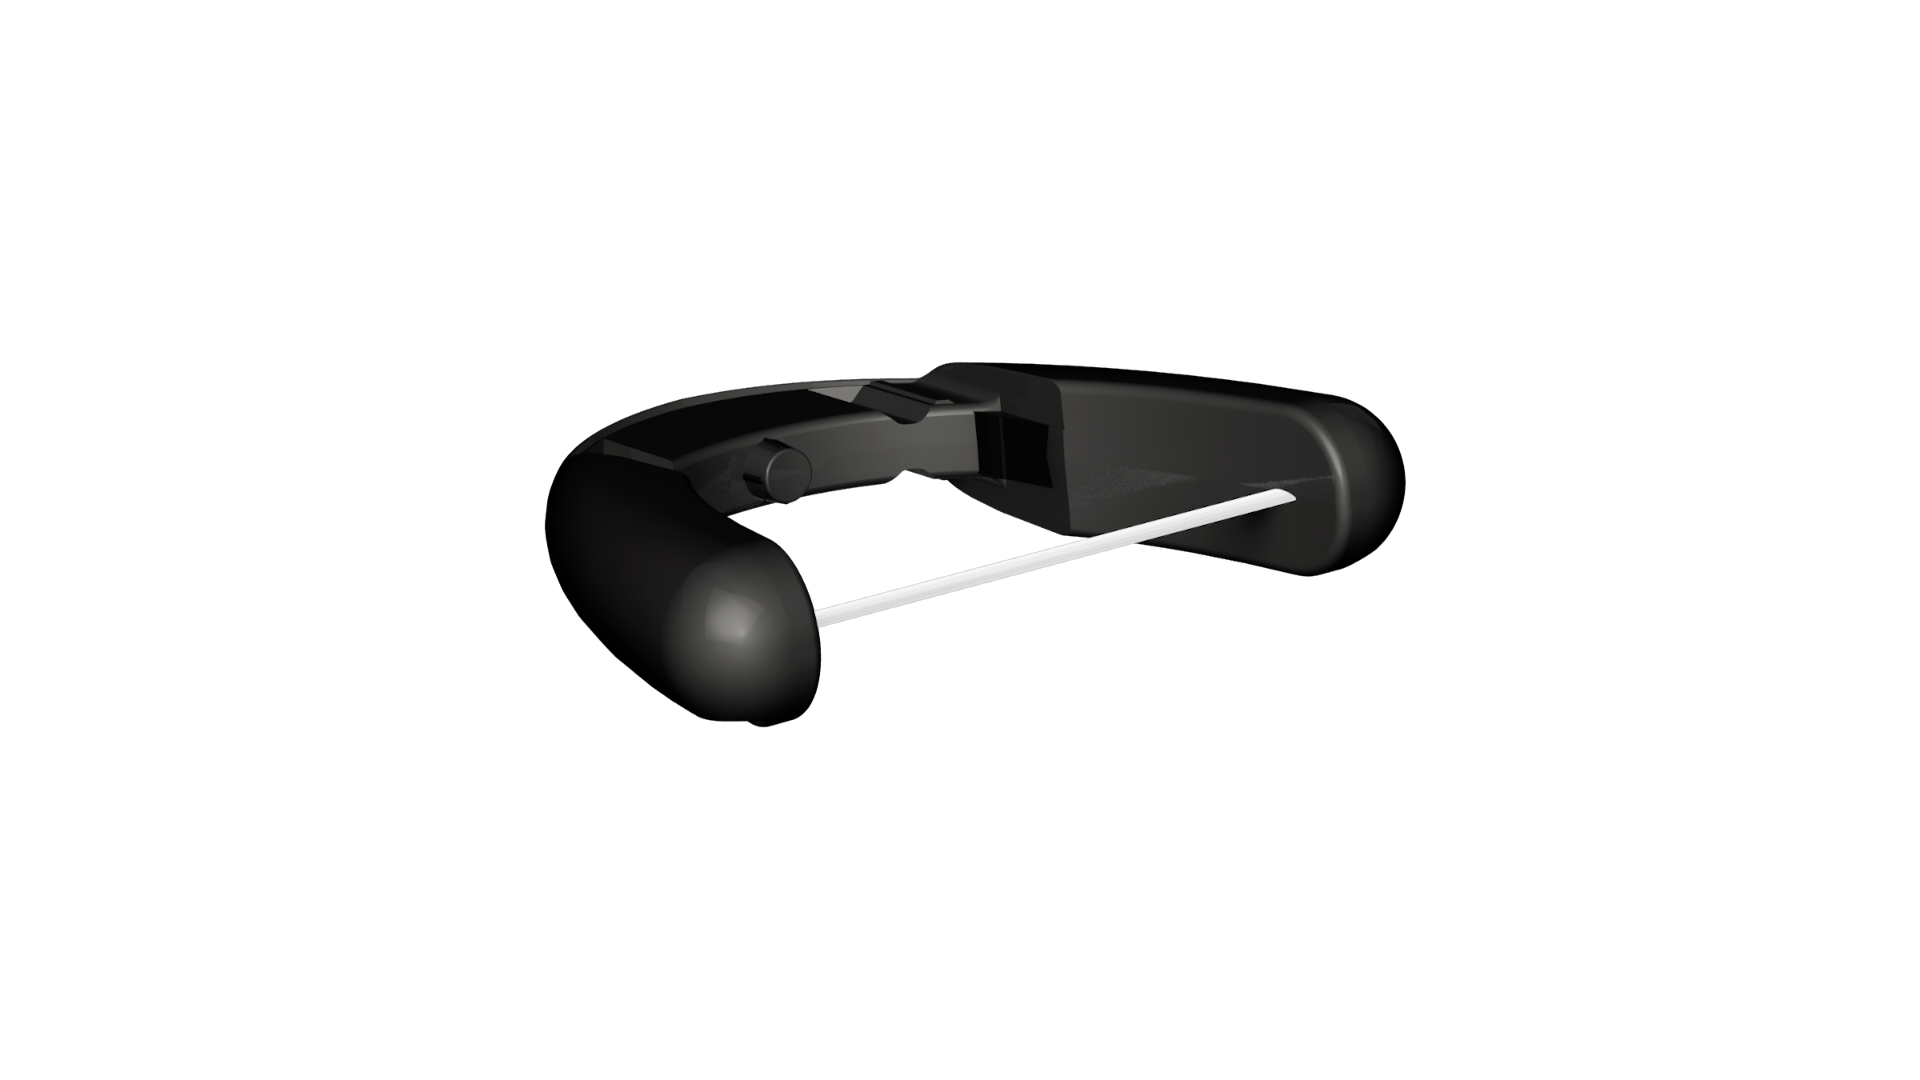 3D render of a black virtual reality headset on a dark background.